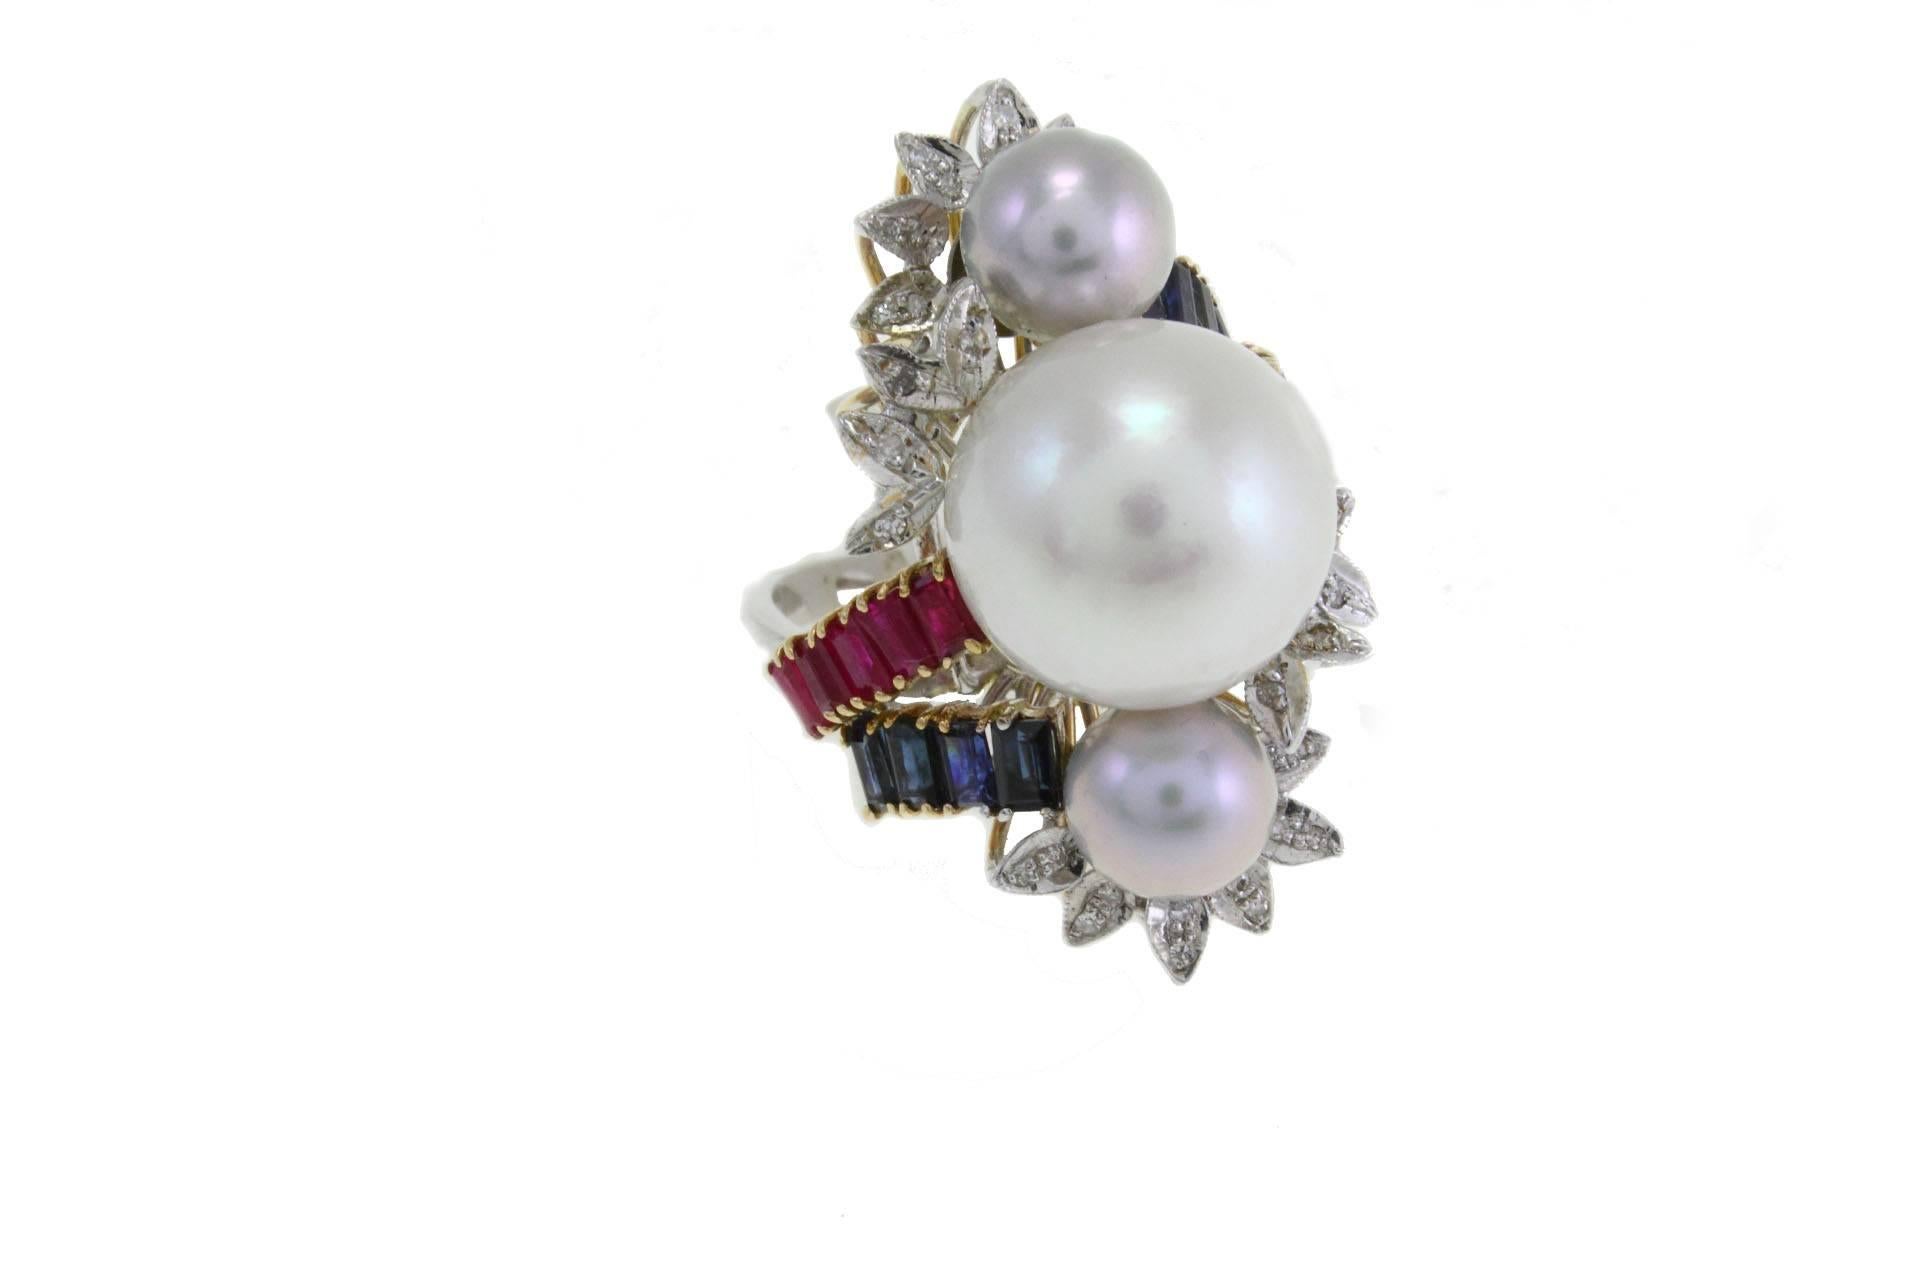 Special ring in 14kt white and yellow gold composed of 3 pearls surrounded by rubies and blue sapphires, with leaves of diamonds.

diamonds 0.15kt
rubies and sapphires 2.88 kt
pearls 5.40gr
tot weight 13.5gr
US Size
Width 0.90 in
Length 1.30